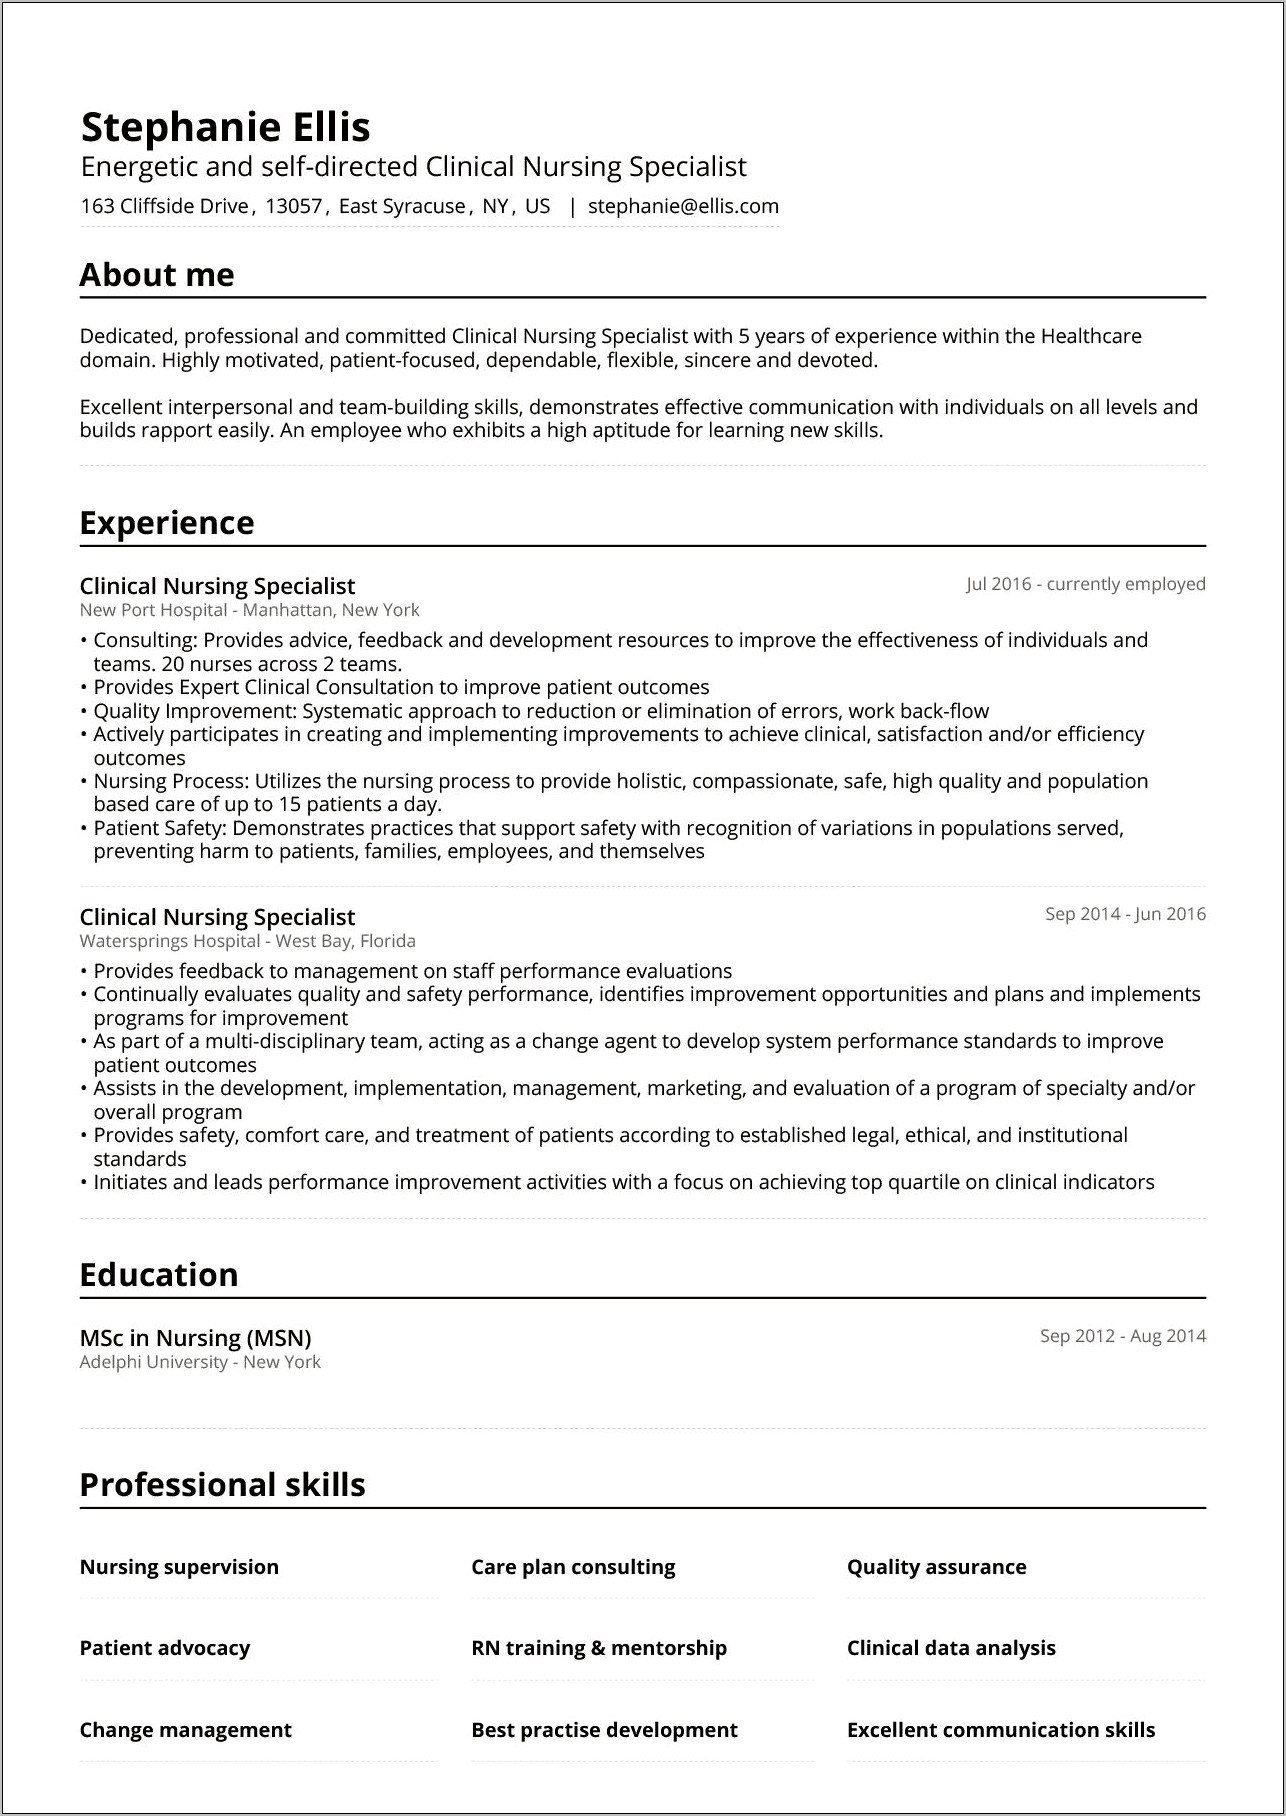 Adding In Nursing Clinical Experience In Resume